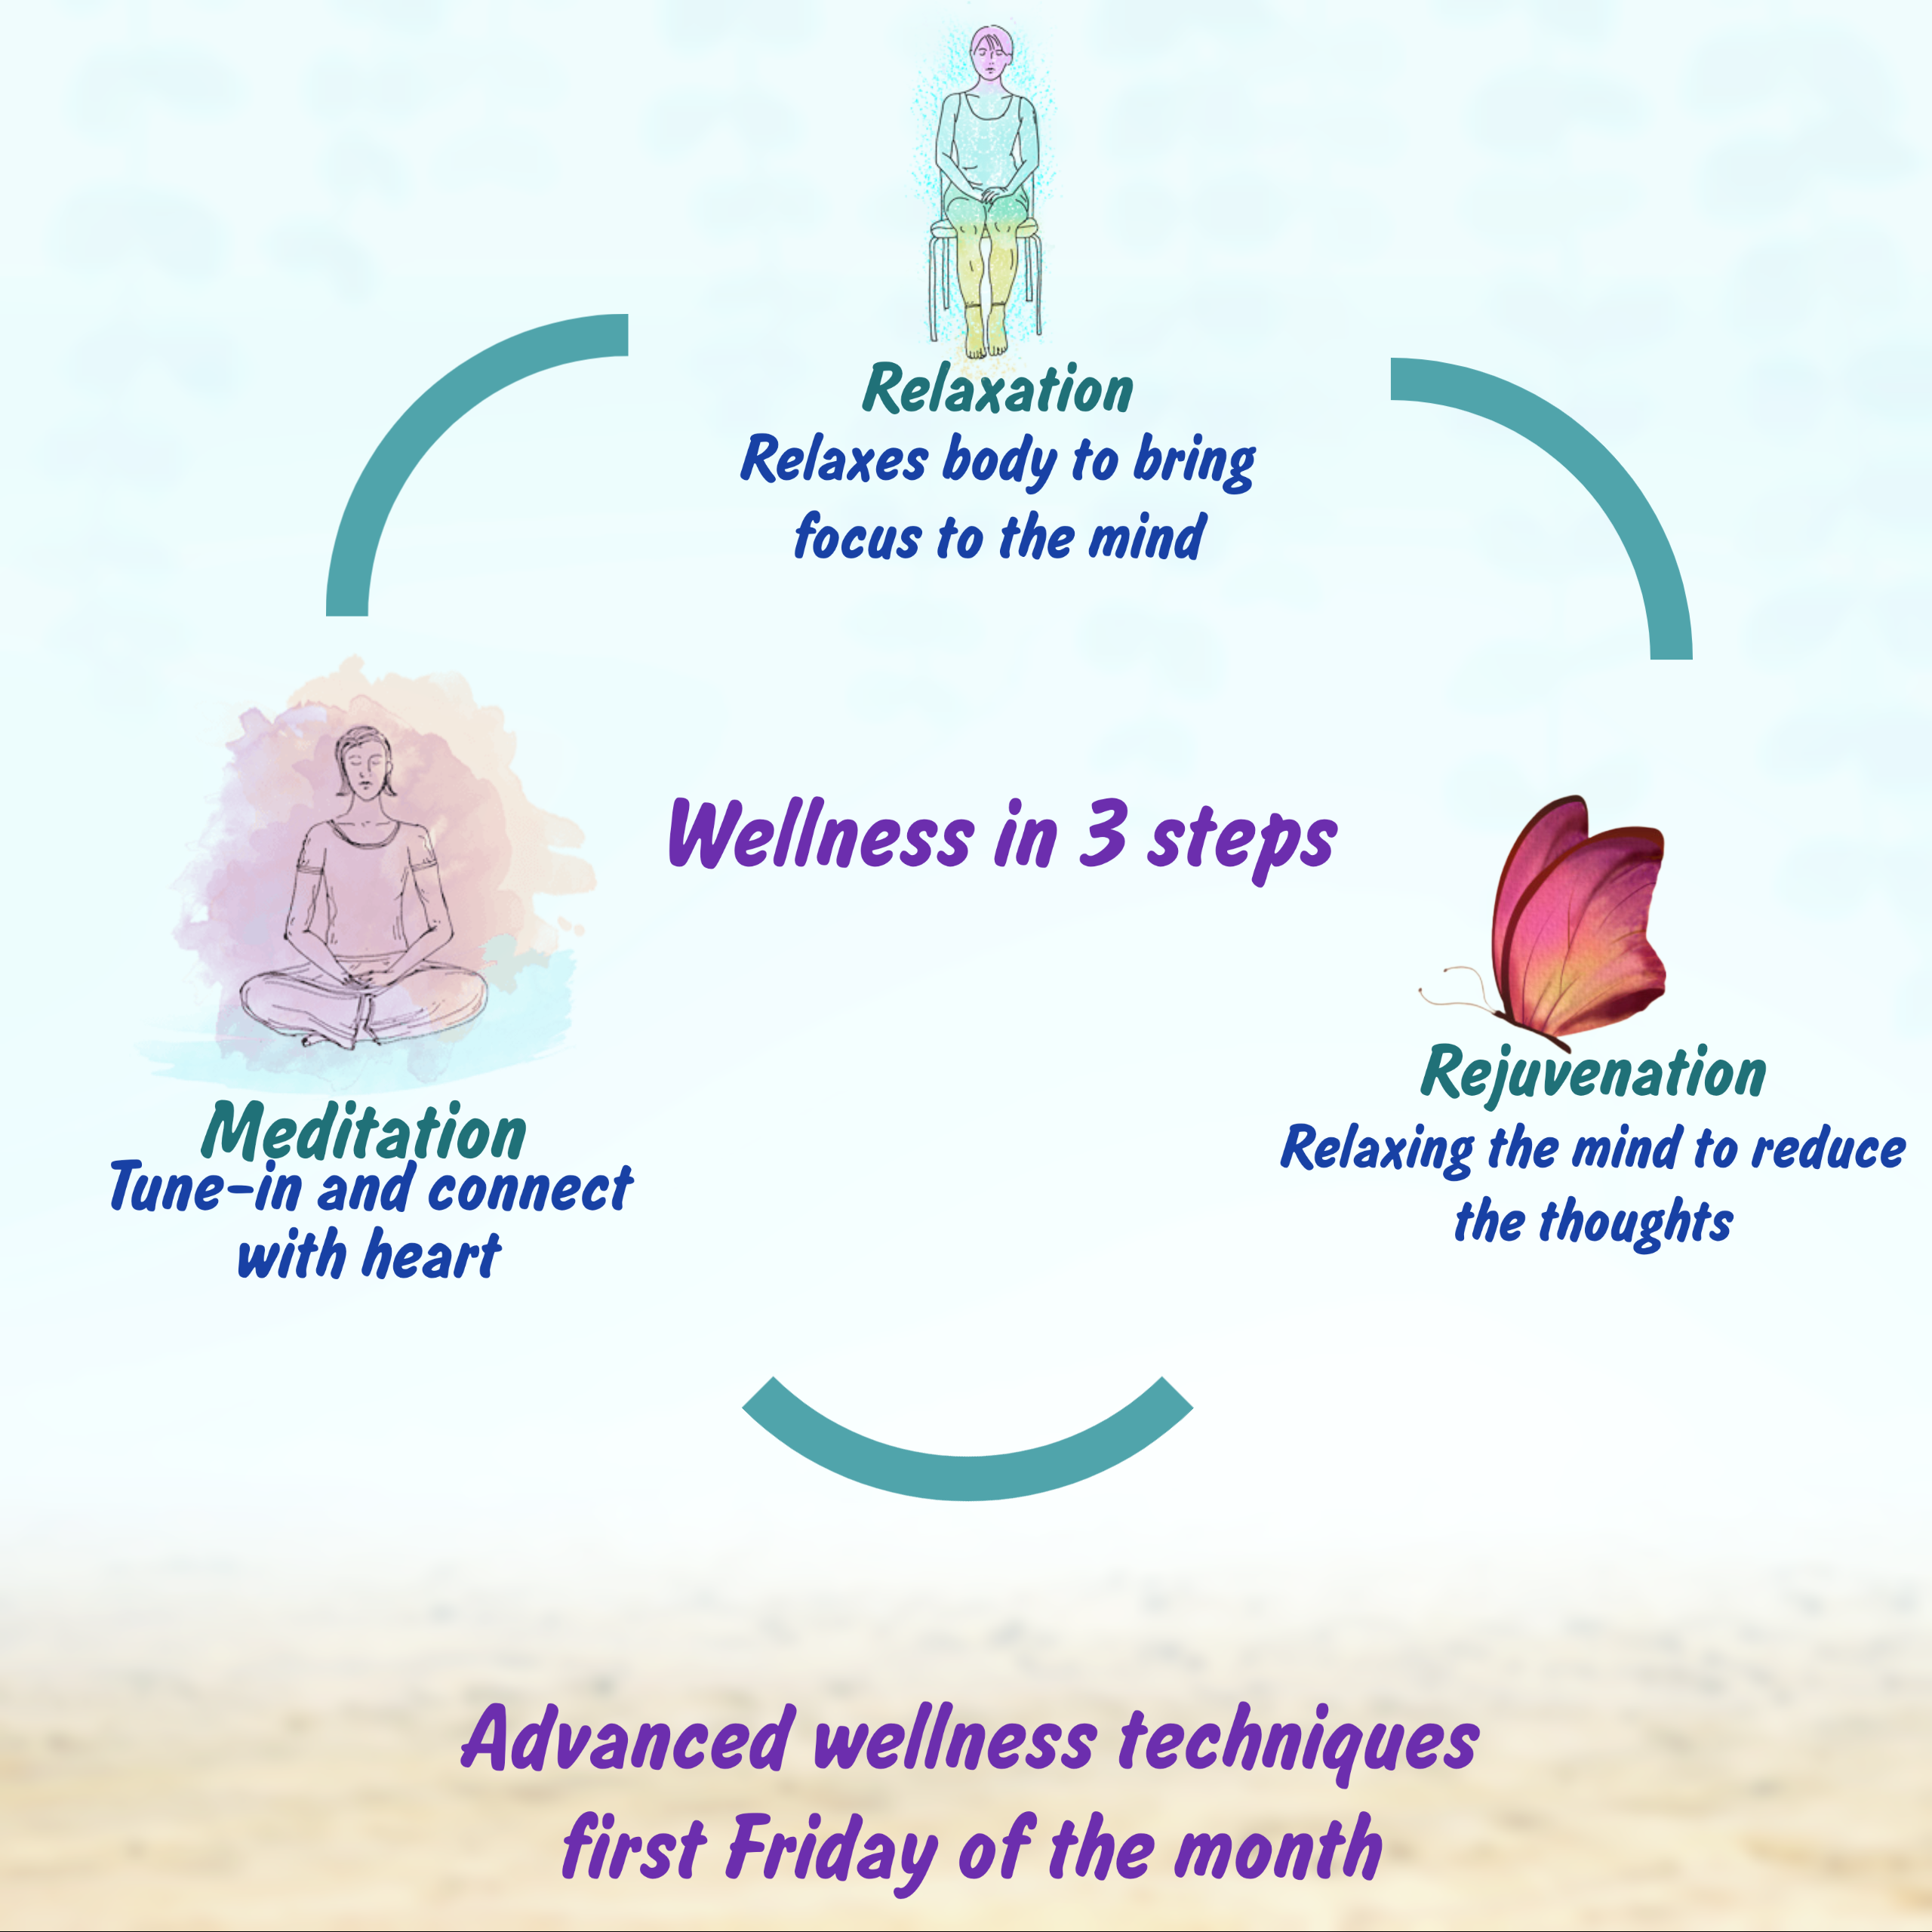 wellness-in-3-steps-image